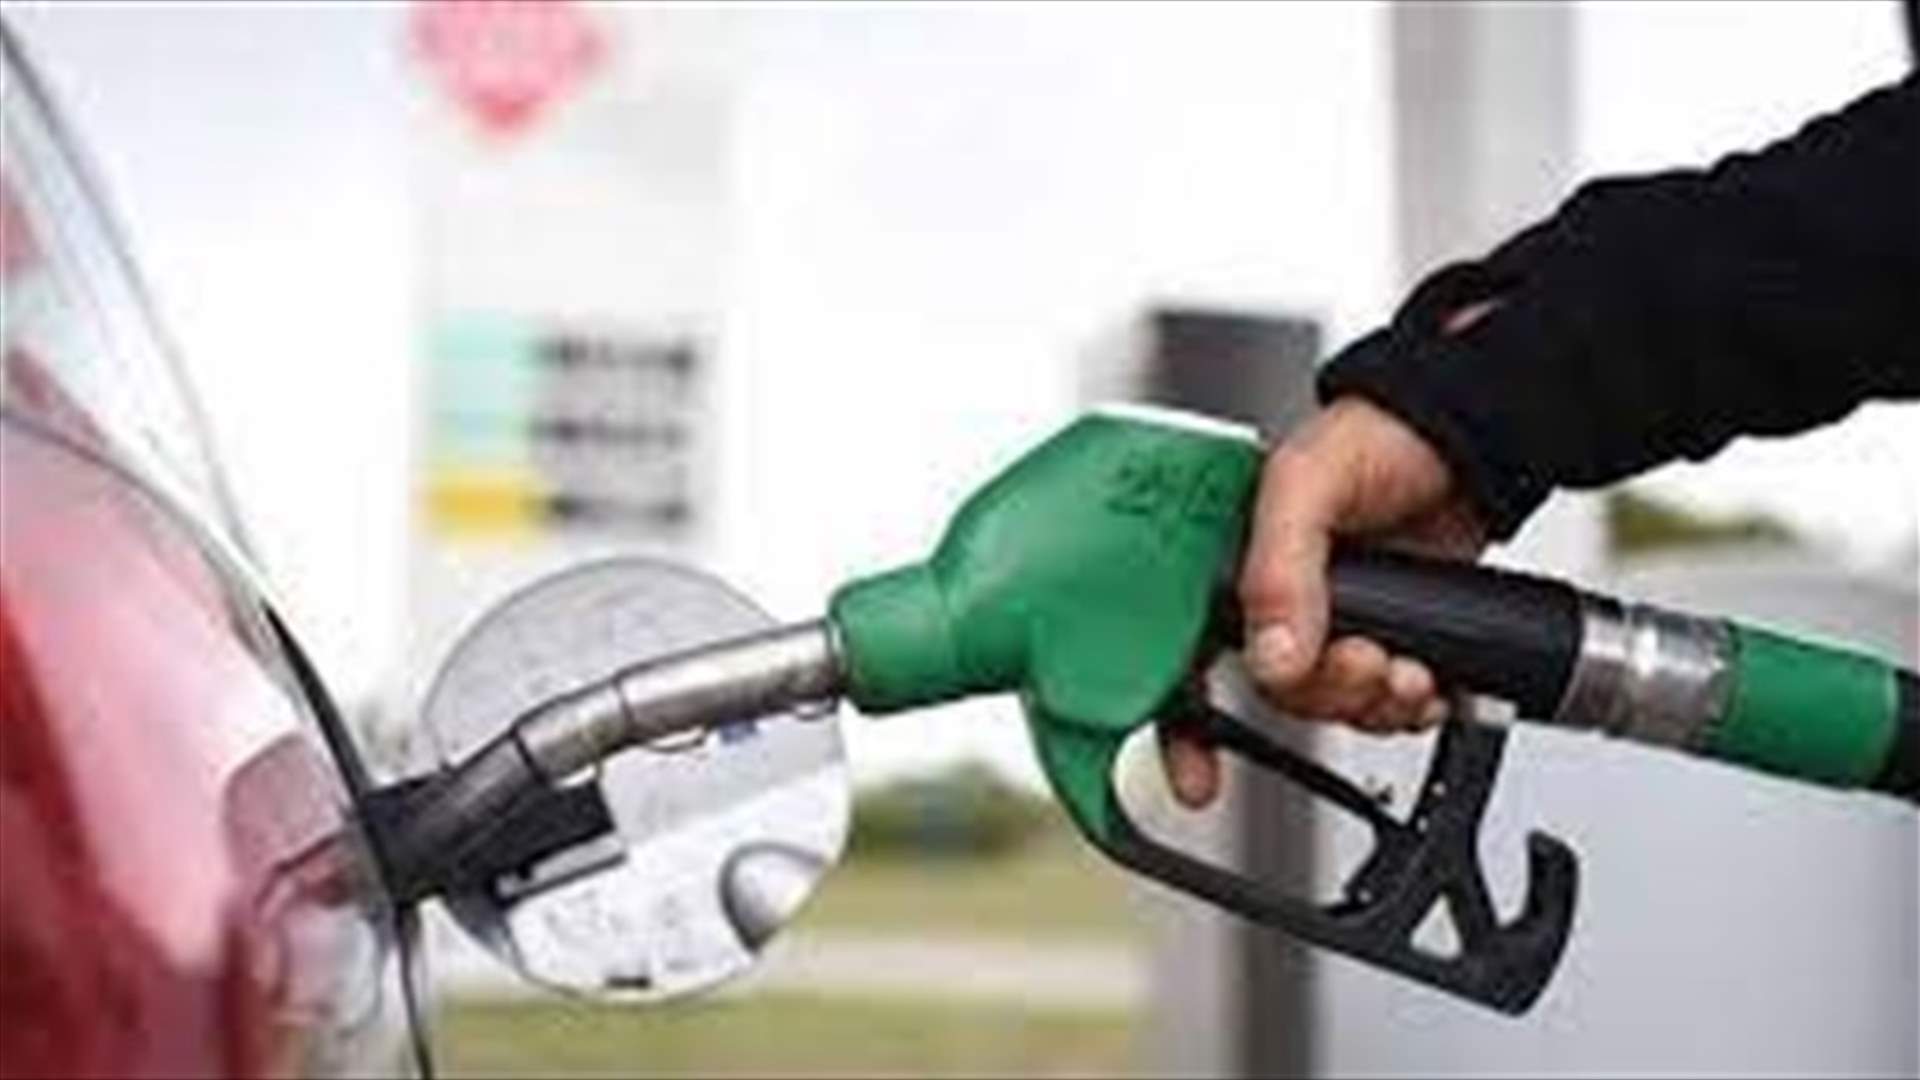 Significant drop in fuel prices across Lebanon